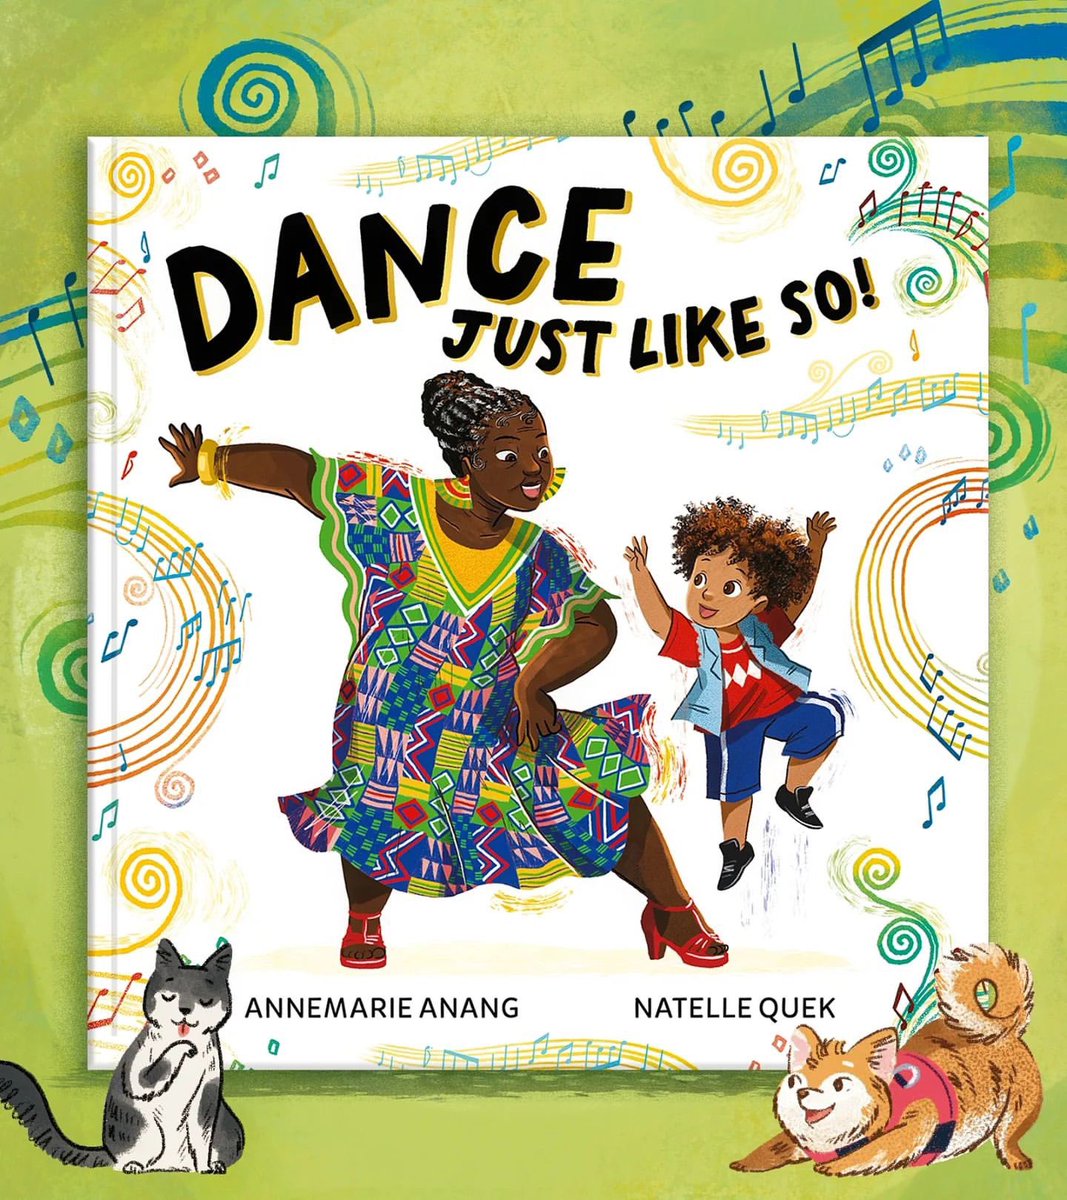 COVER REVEAL! 🥳 Excited to share the next book by the dream team that is @NatelleQuek and I, plus @5Quills_kids! DANCE JUST LIKE SO! is out this September!💃🏾🎶🥳